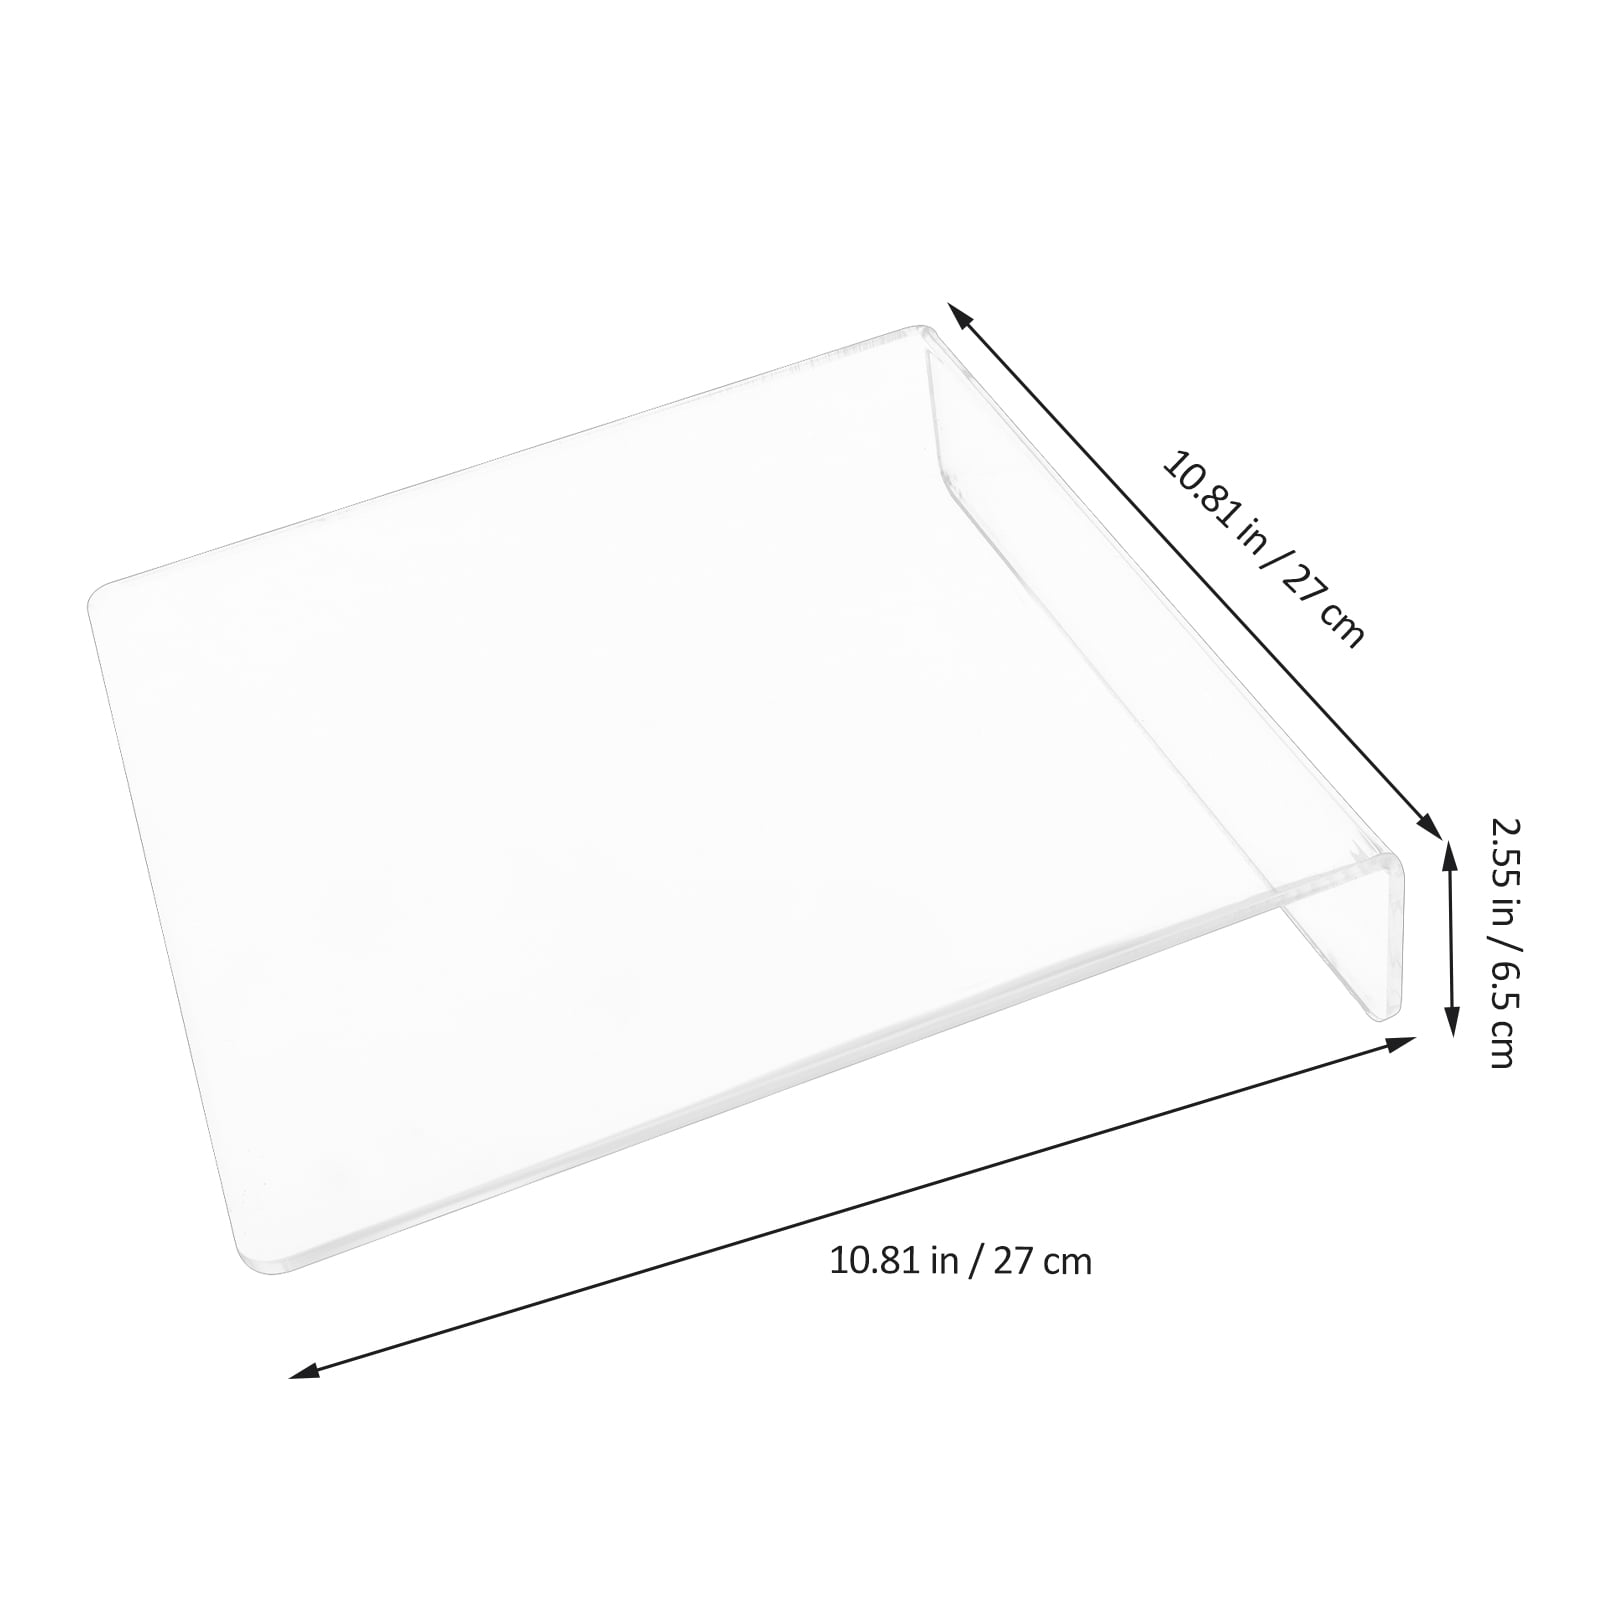 Household Slant Board for Writing Clear Acrylic Slant Painting